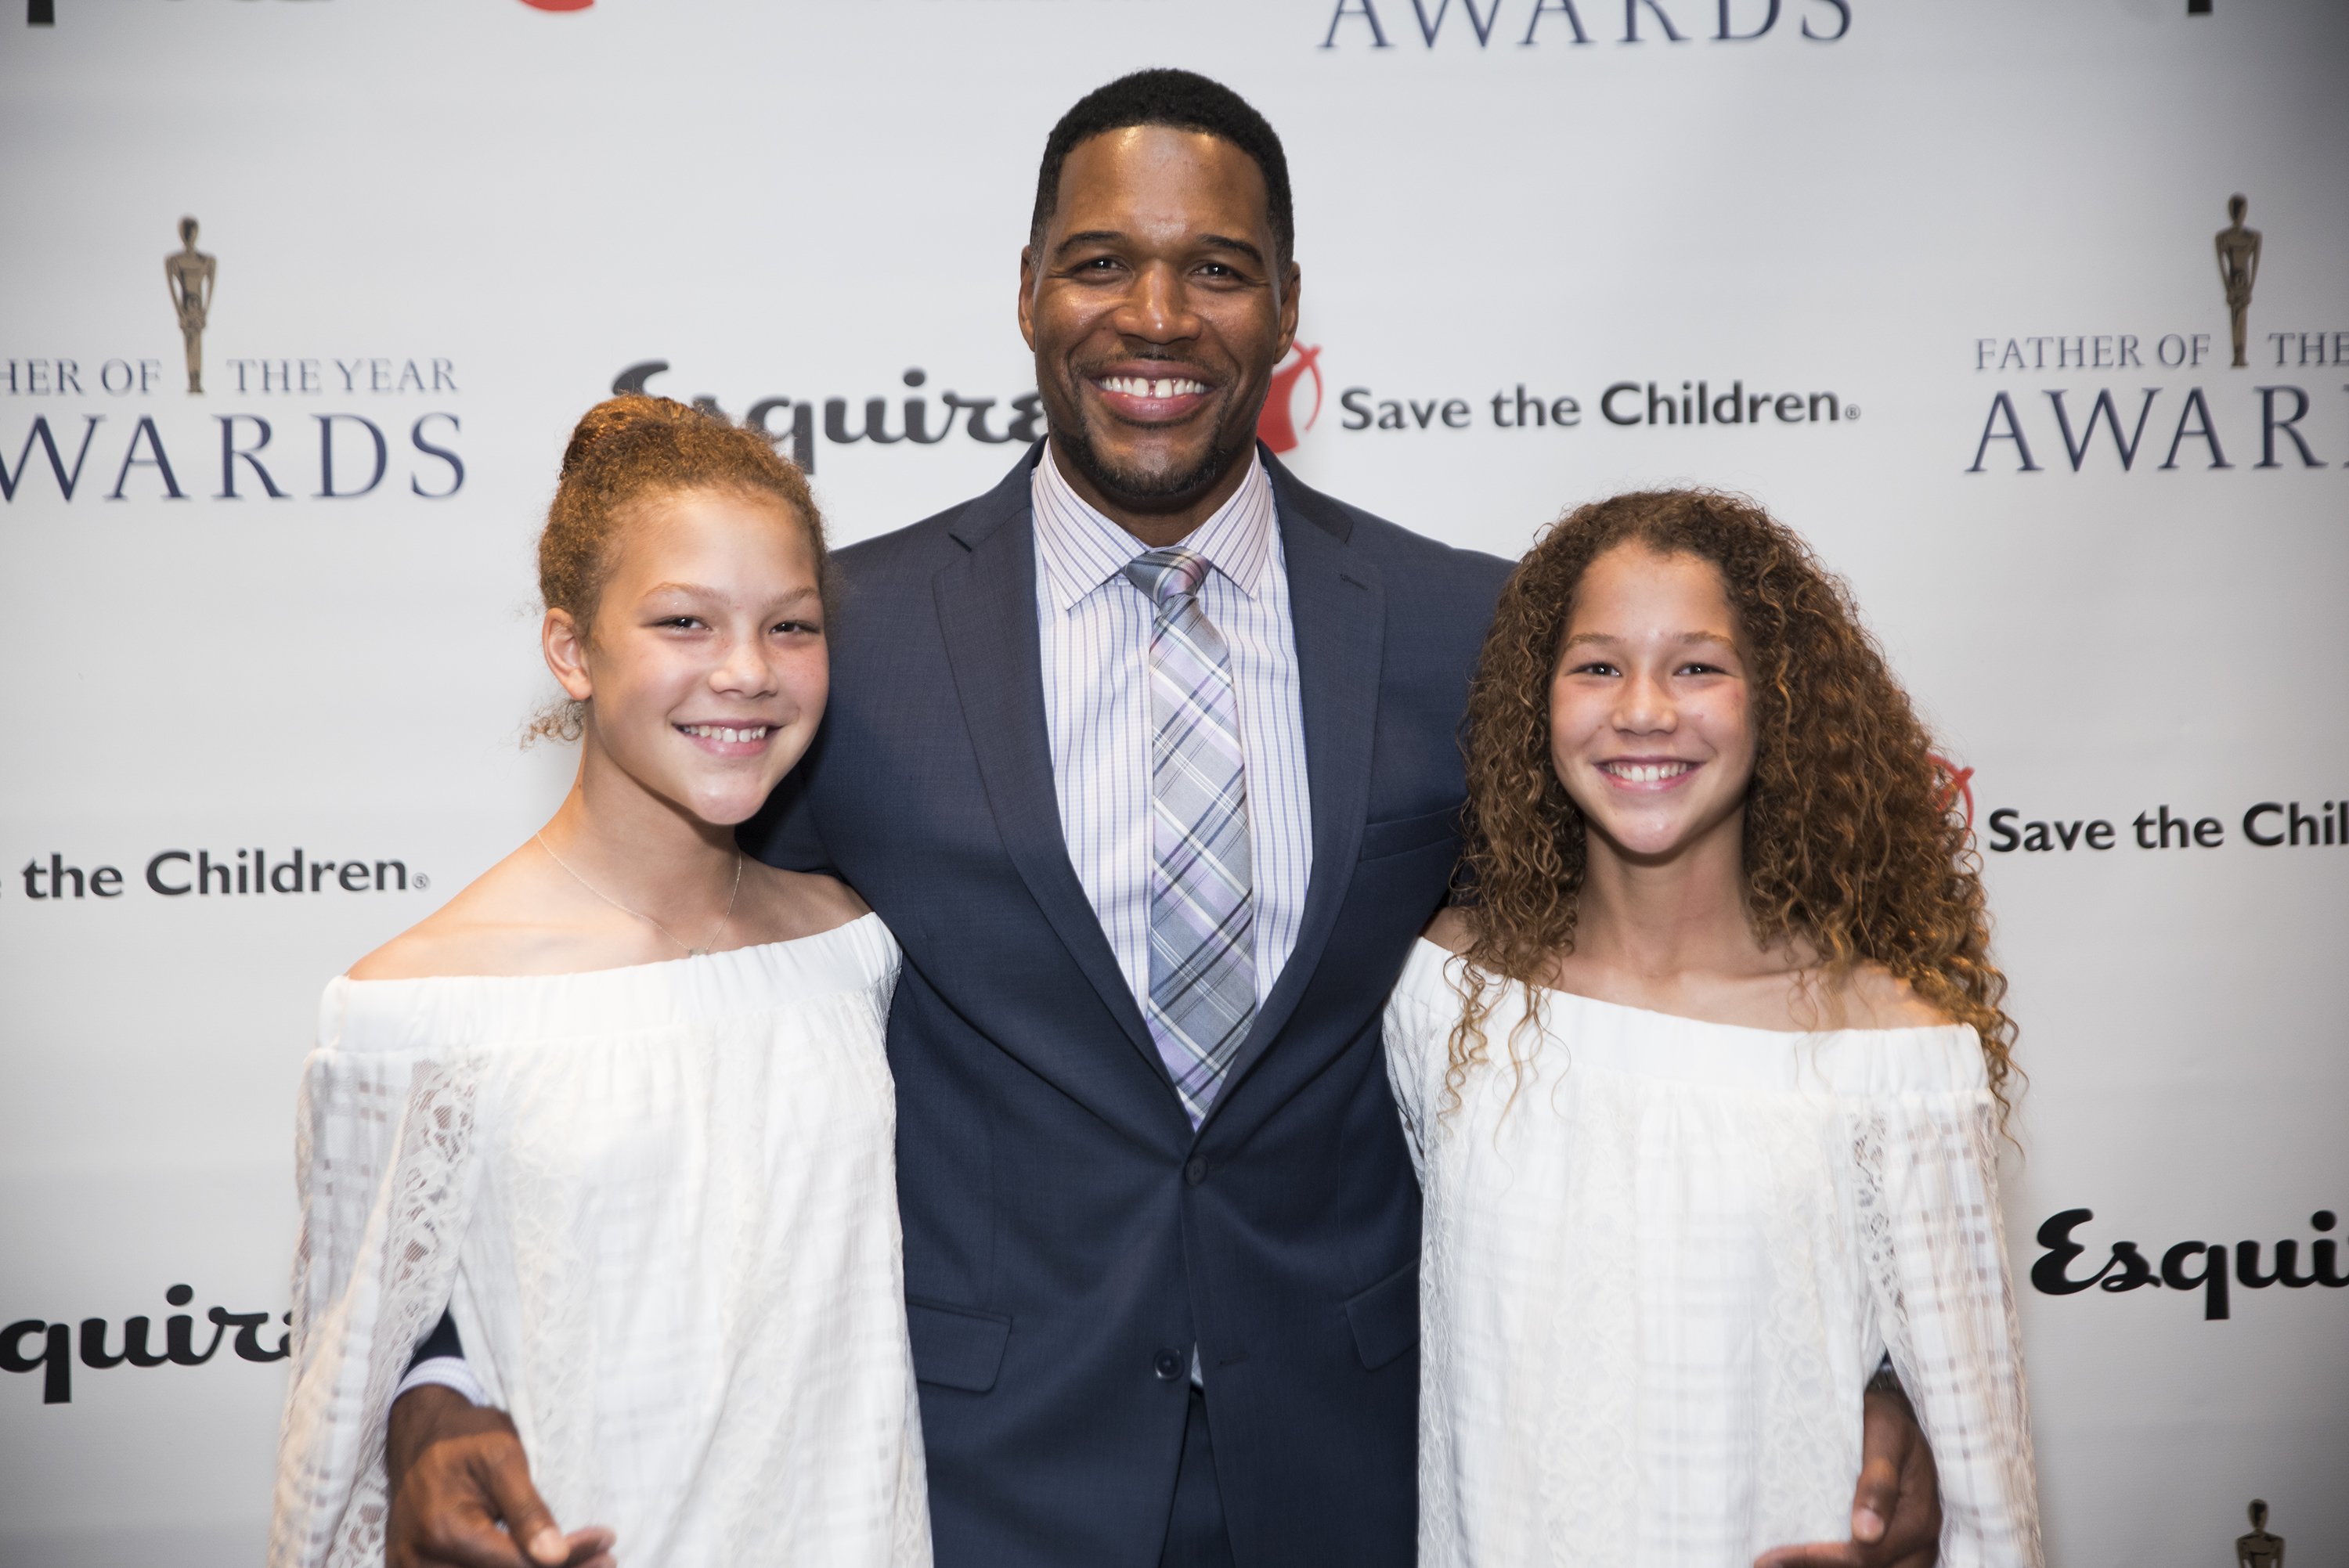 Michael Strahan and his daughters Sophia and Isabella attend the 76th Annual Father of the Year Awards at New York Hilton on June 15, 2017, in New York City. | Source: Getty Images